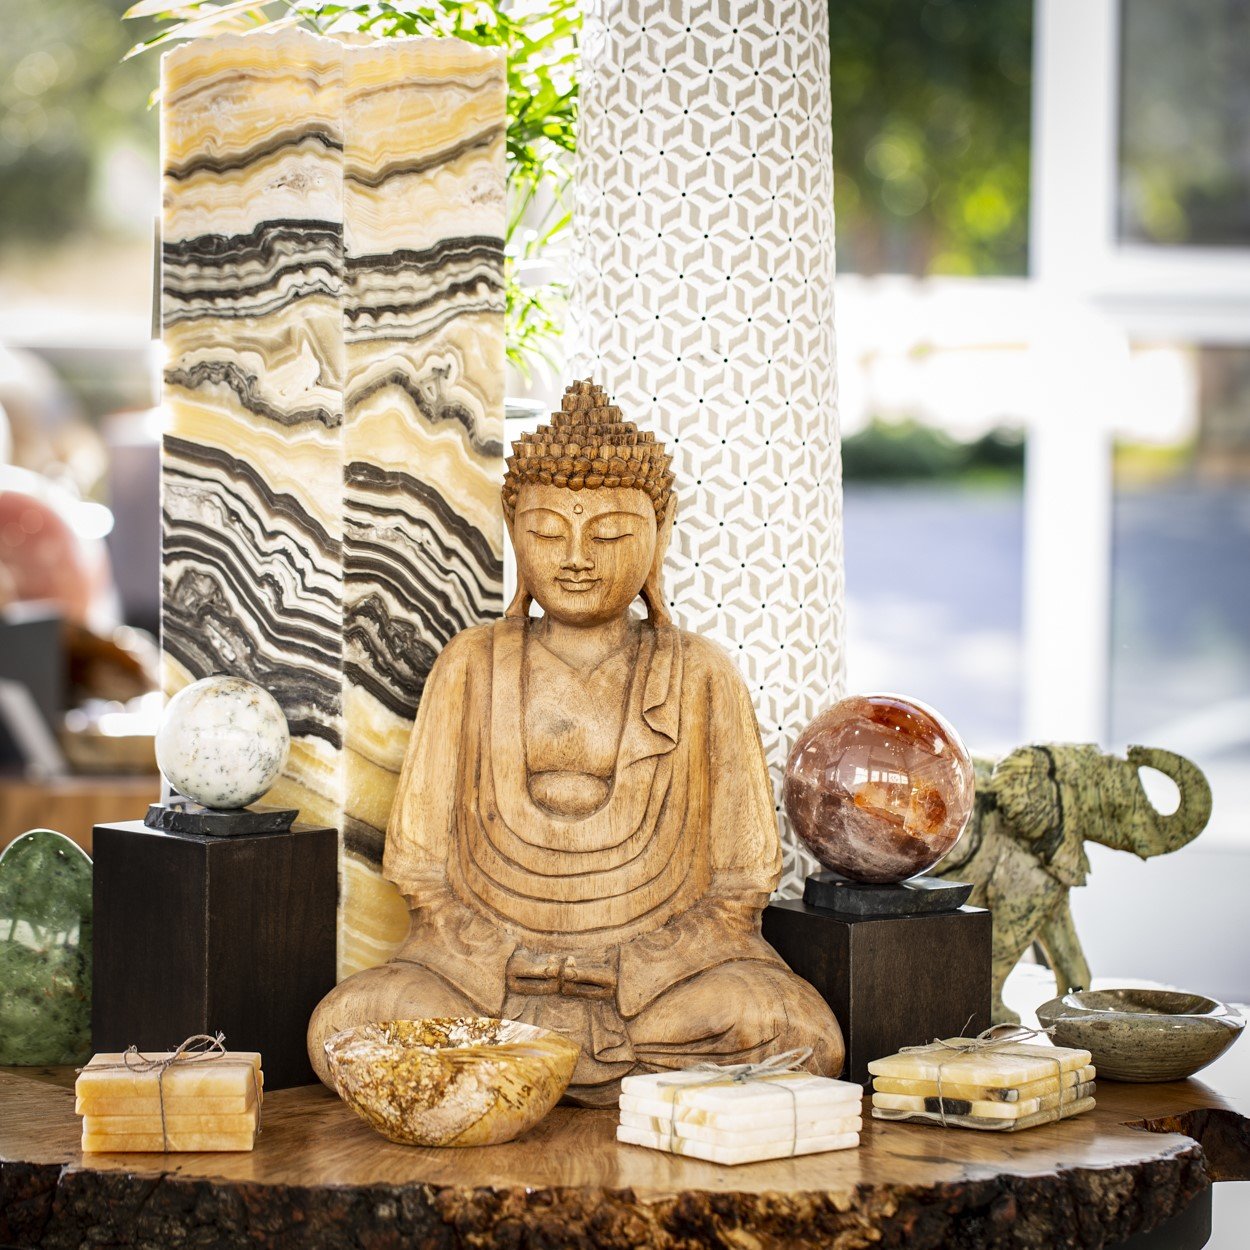 Bryki Gallery has a variety of high-quality, personally curated crystals and crystal home decor to help you give memorable, meaningful gifts this holiday season.